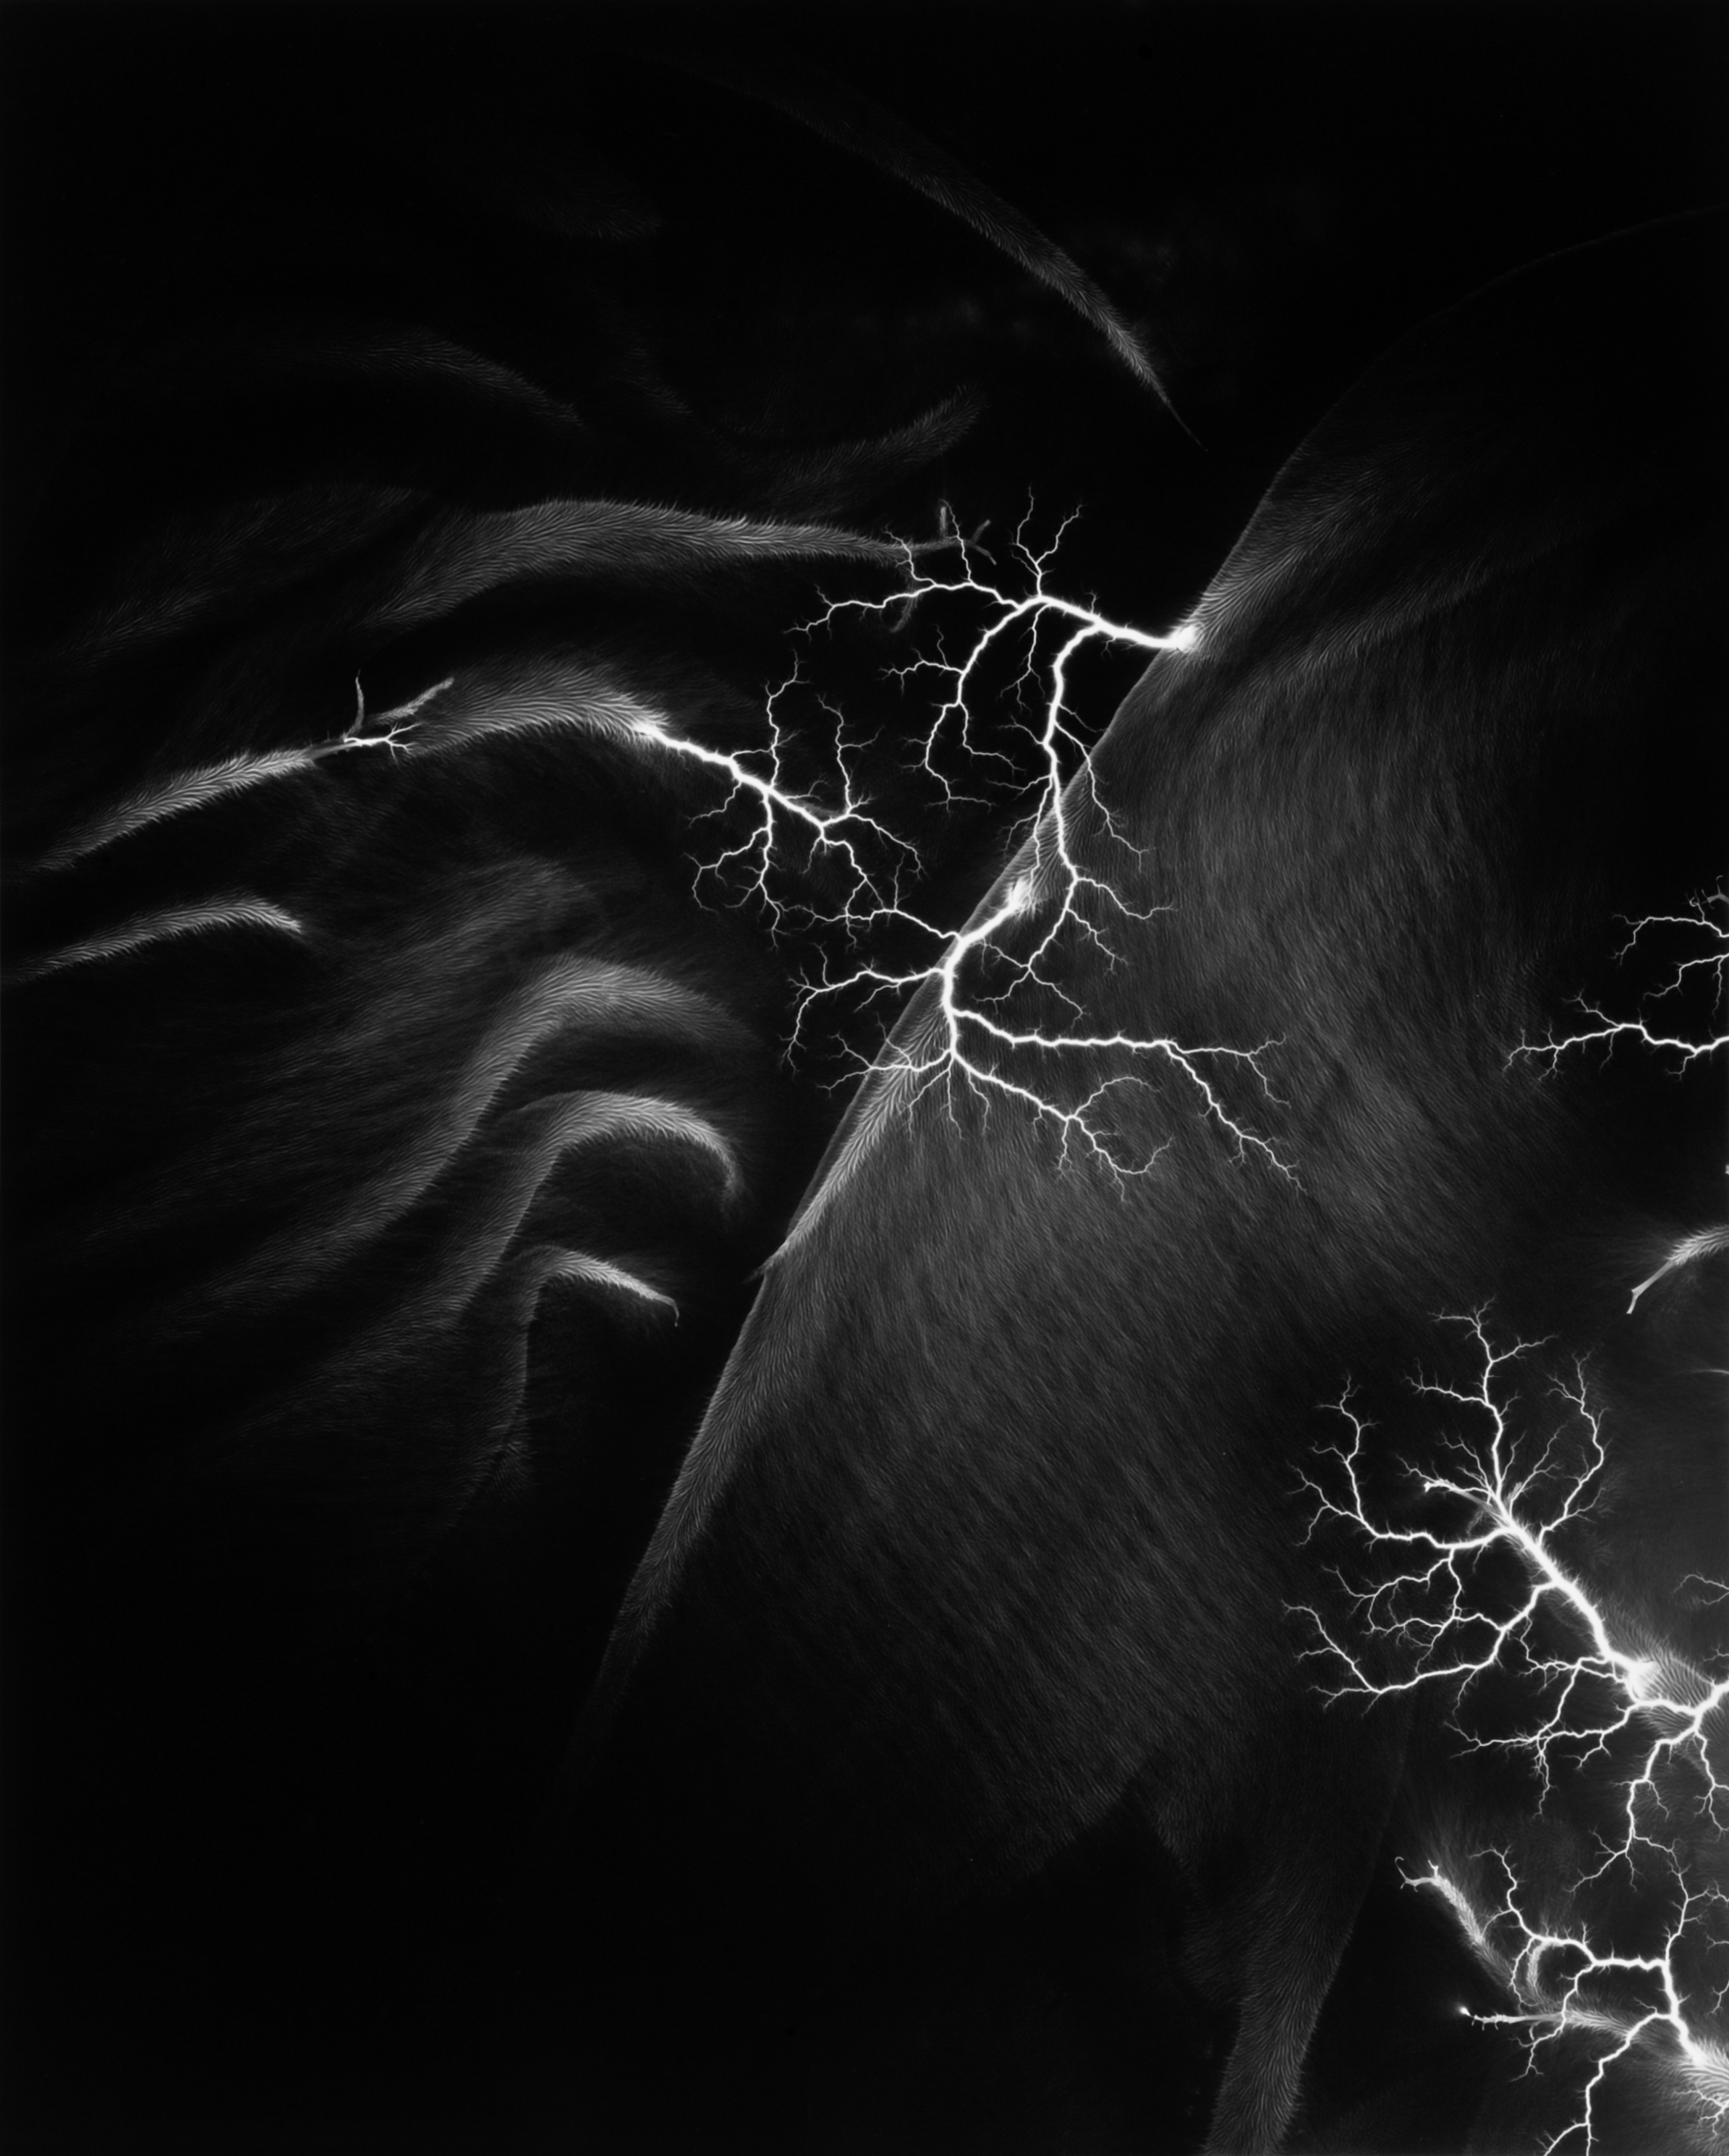 Black and white photograph of lighting striking against black background